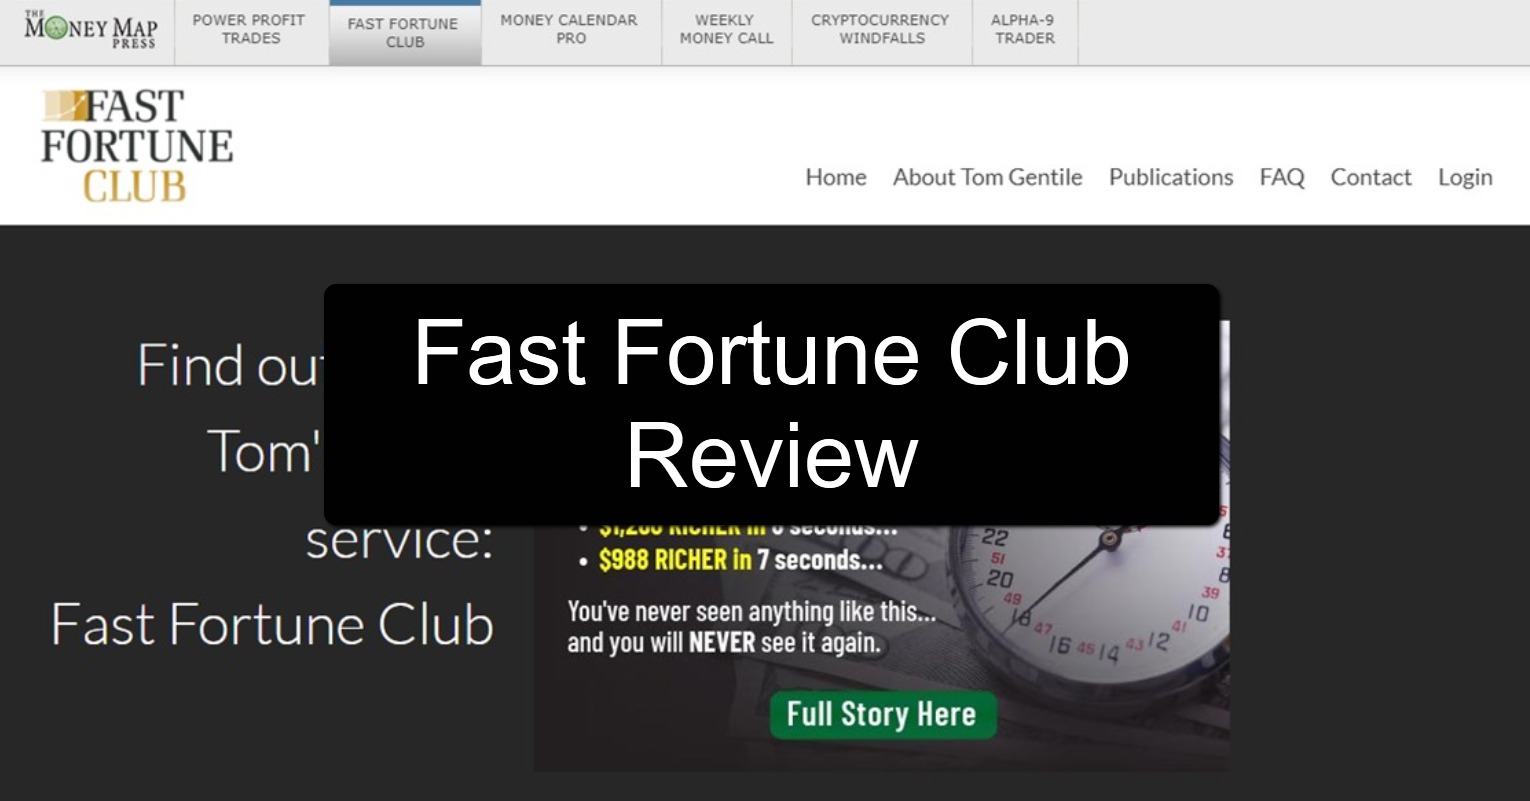 Fast Fortune Club featured